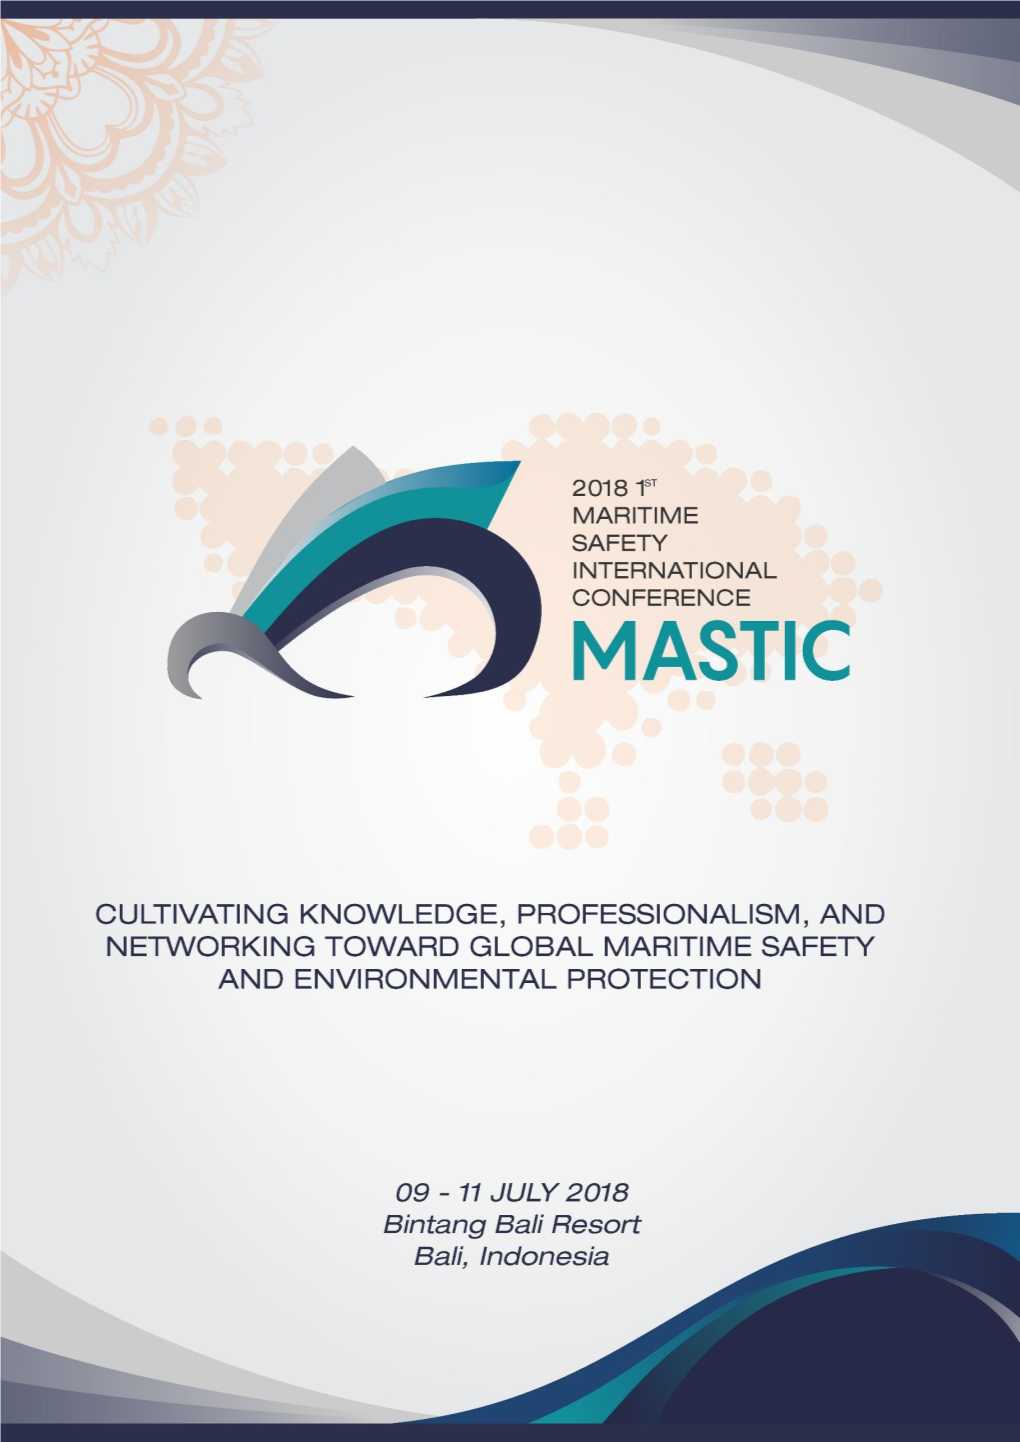 2018 1St Maritime Safety International Conference (MASTIC)